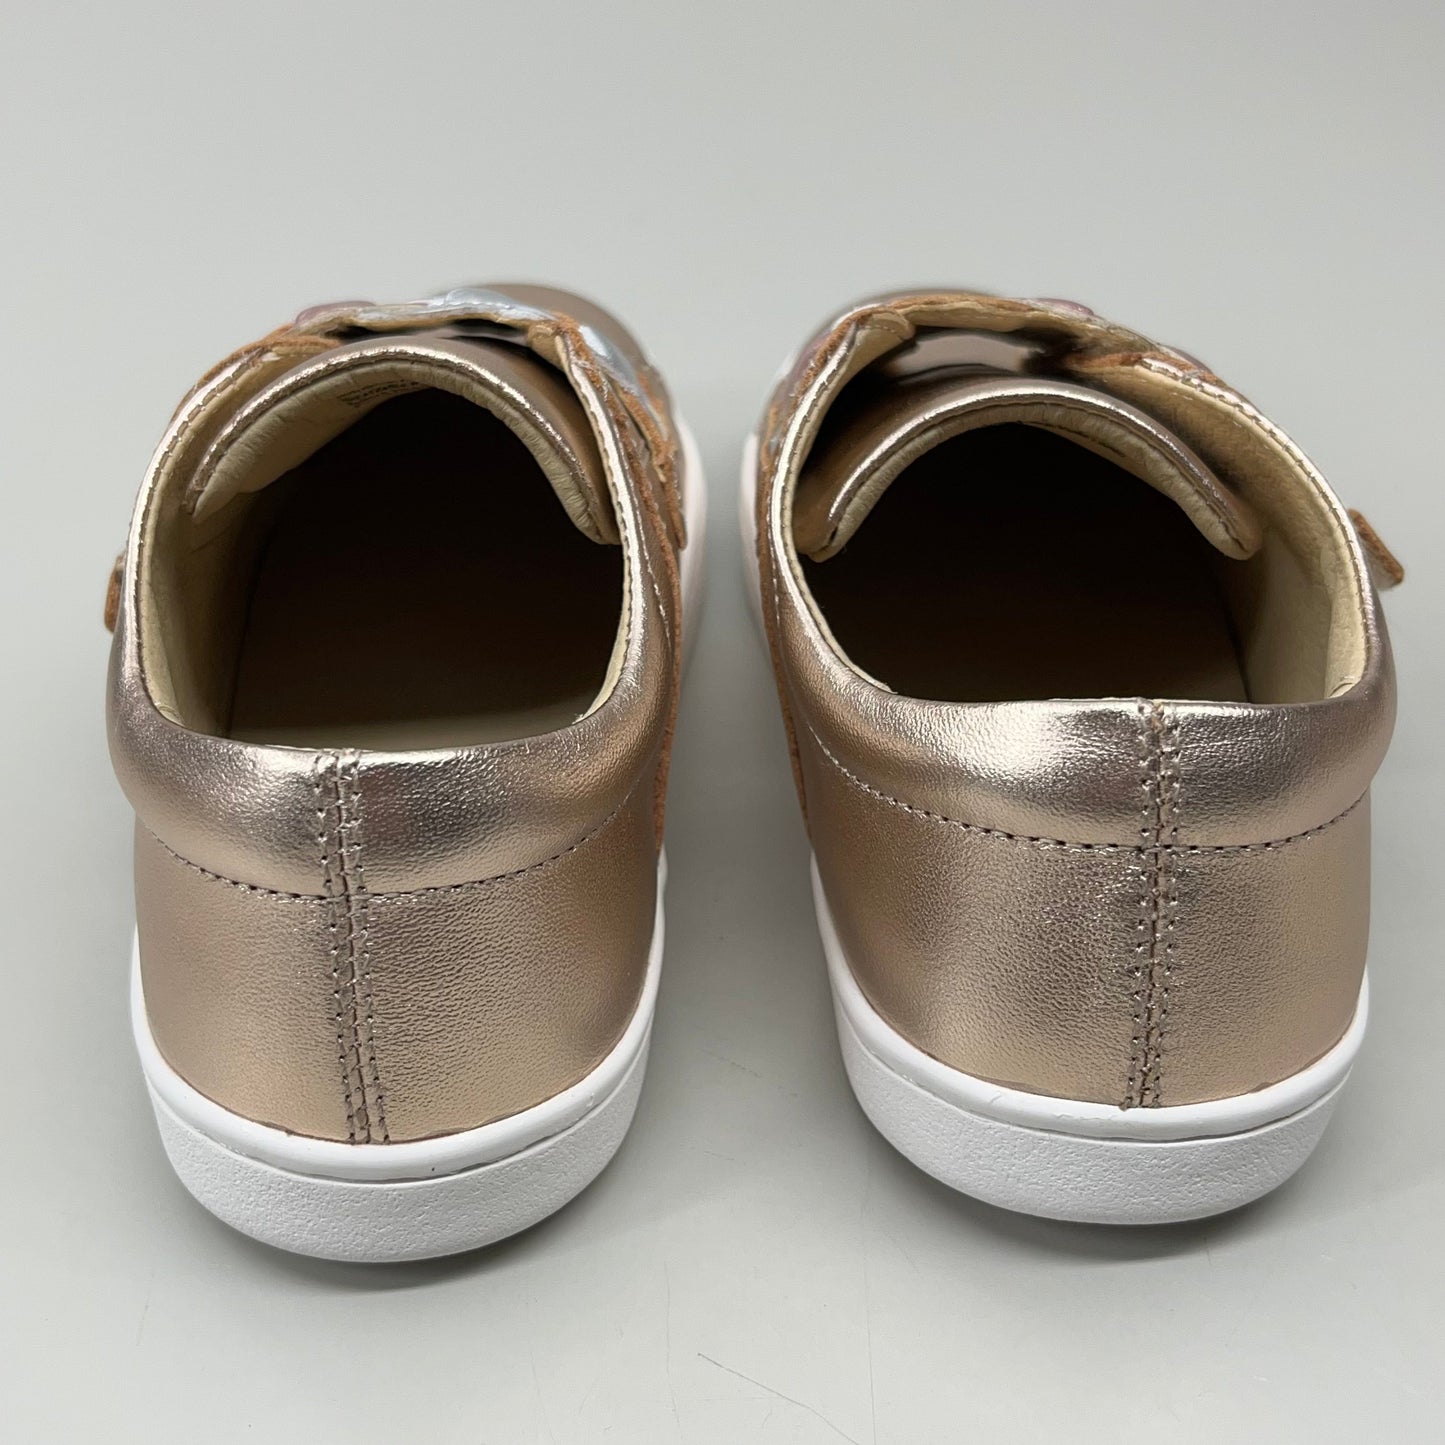 OLD SOLES Igster Sneakers Kid's Leather Shoe Sz 27 US 10 Copper/ Silver/ Pink Frost #6132